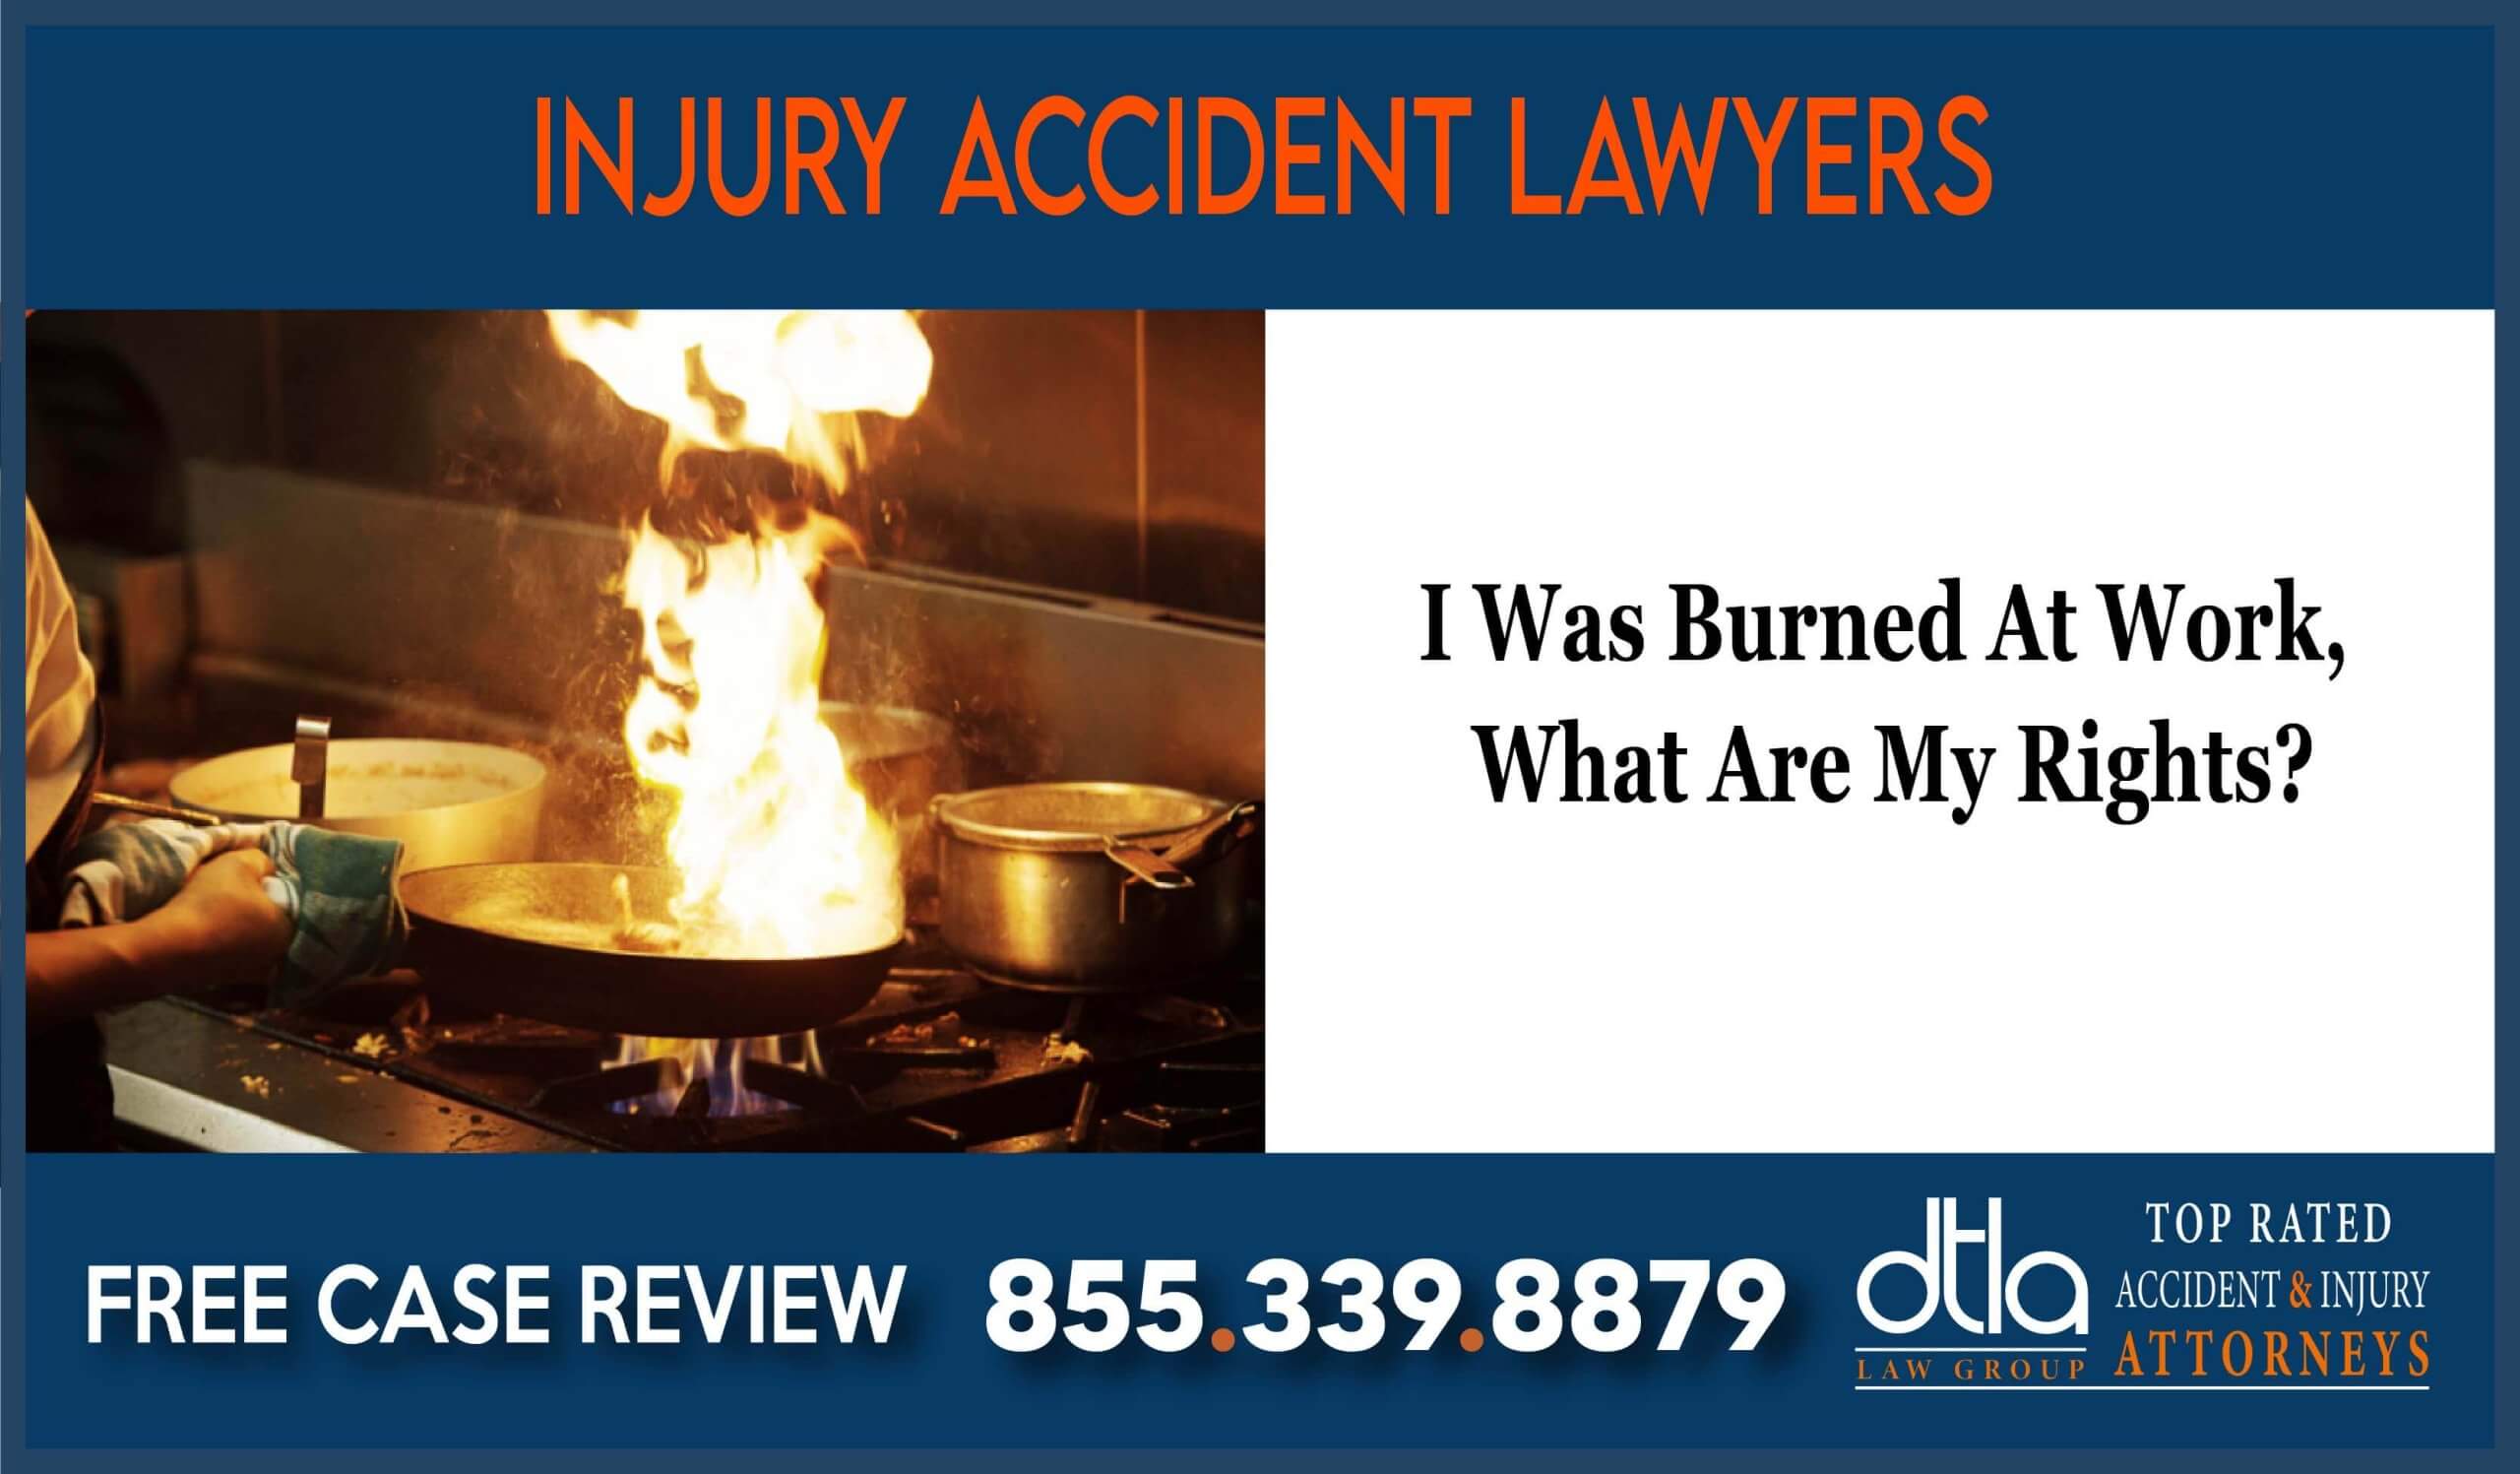 I Was Burned At Work What Are My Rights lawyer attorney sue lawsuit compensation incident accident